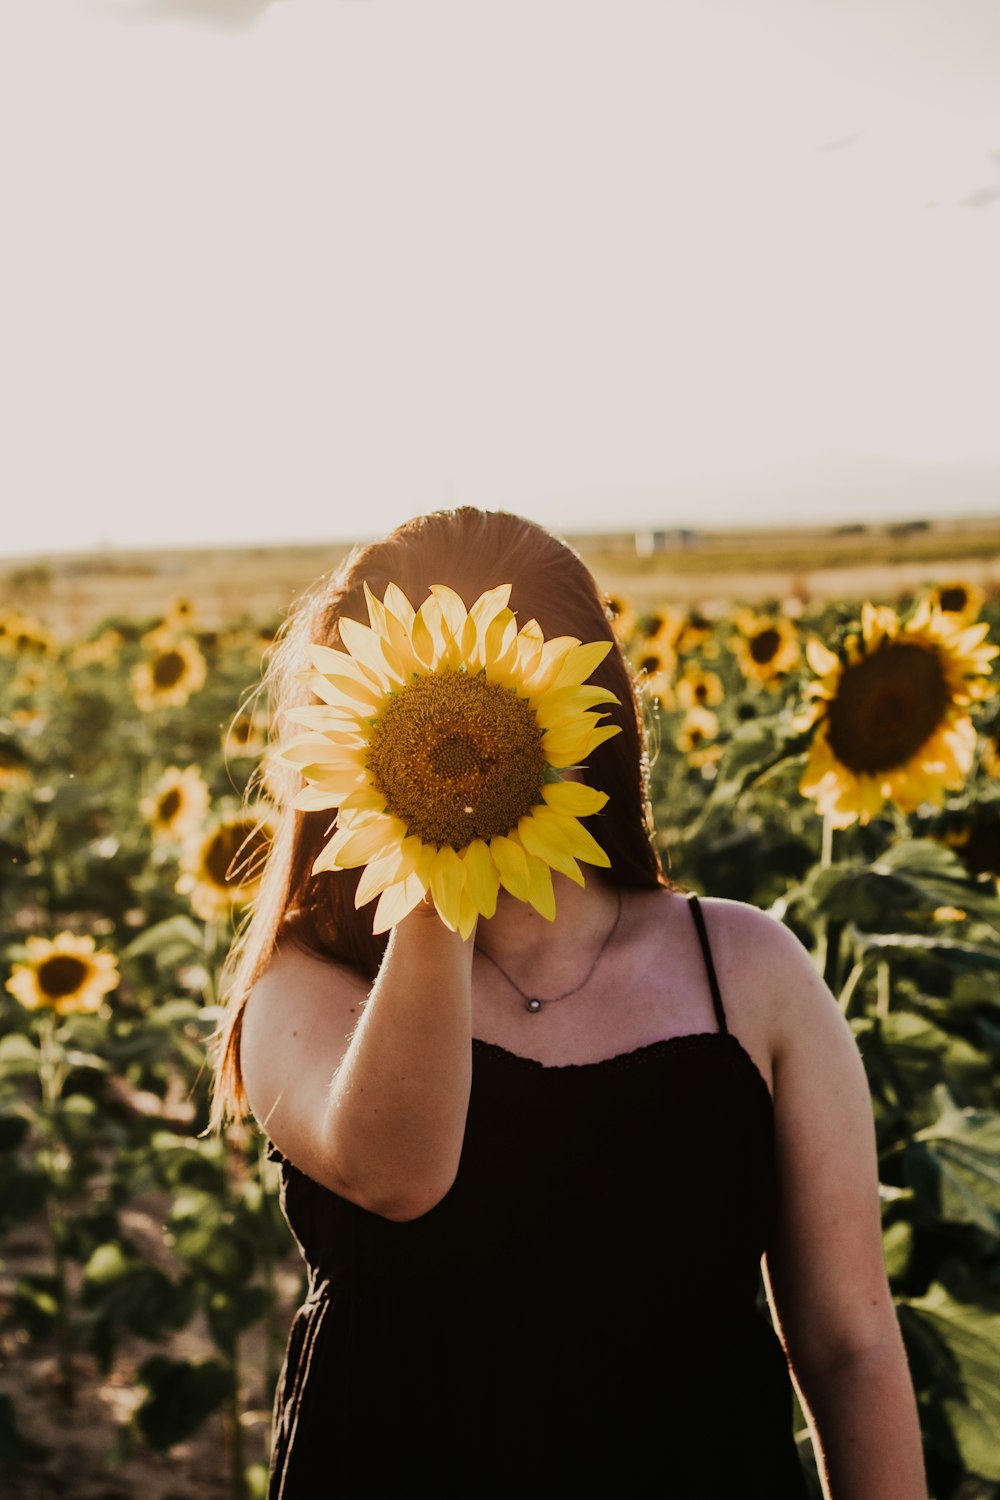 woman in black tank top holding sunflower during daytime